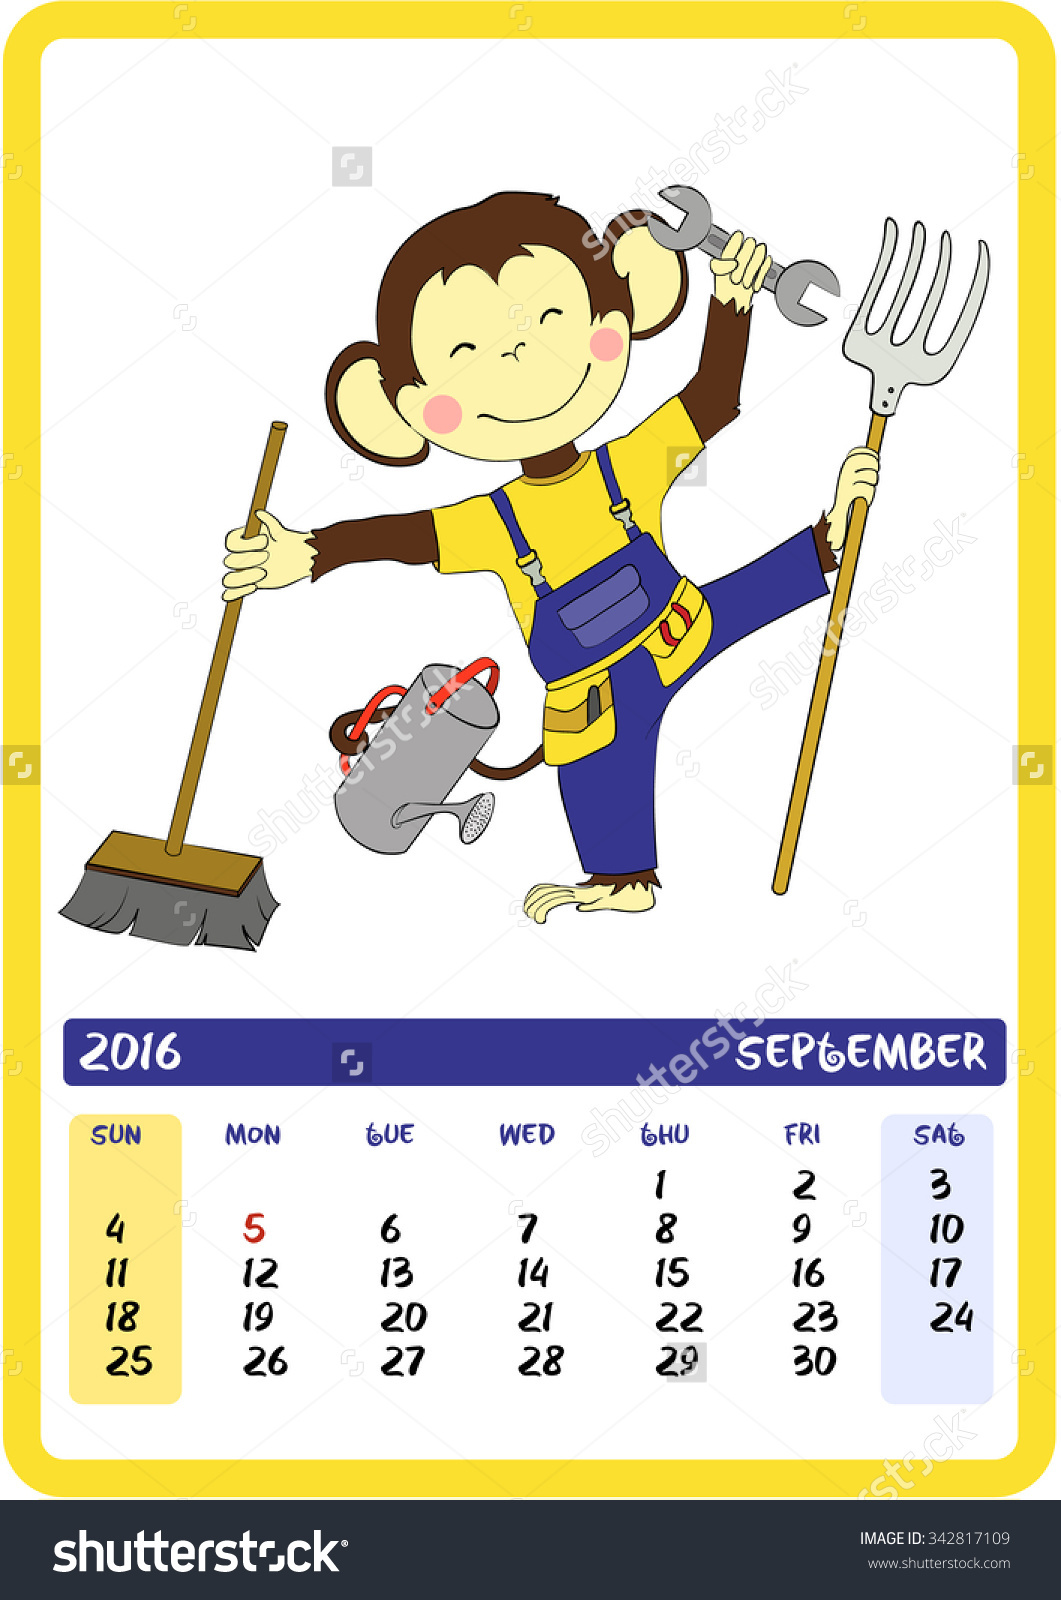 September. Labor Day. Monkey Holding Different Tools. 2016.